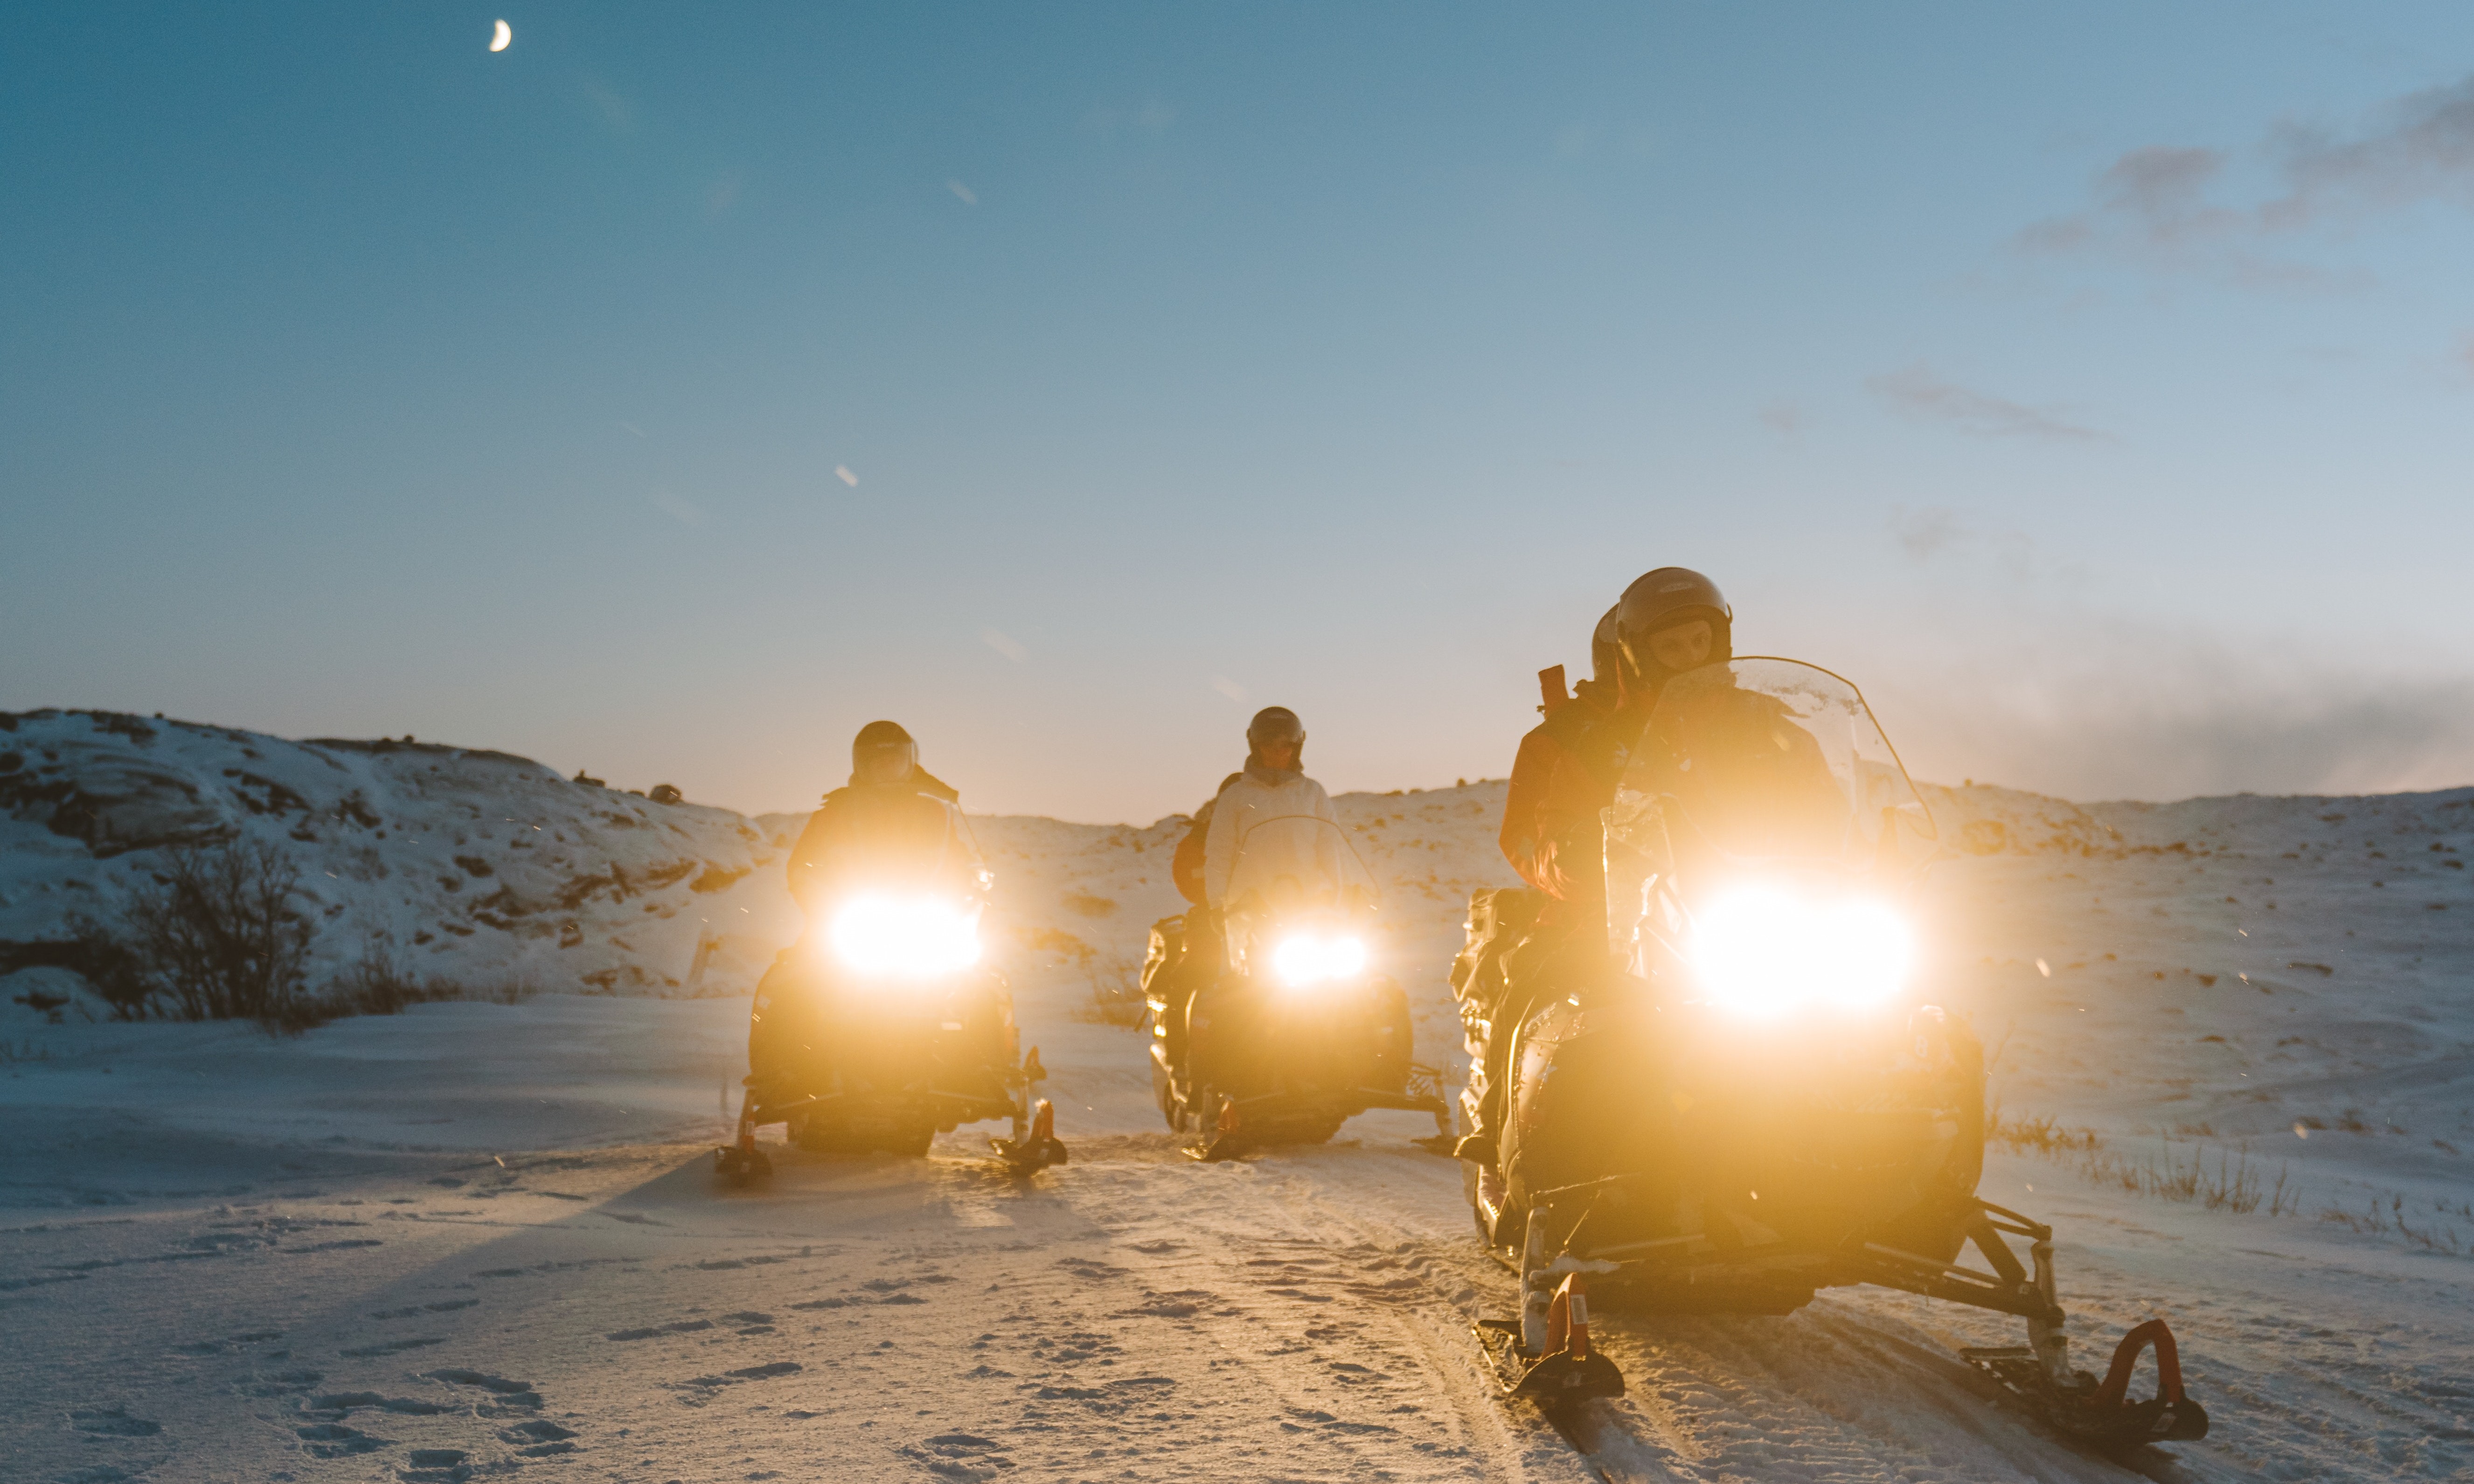 Snowmobiling in Saskatchewan: Registration Tips, Insurance Coverage, and Things to Keep in Mind